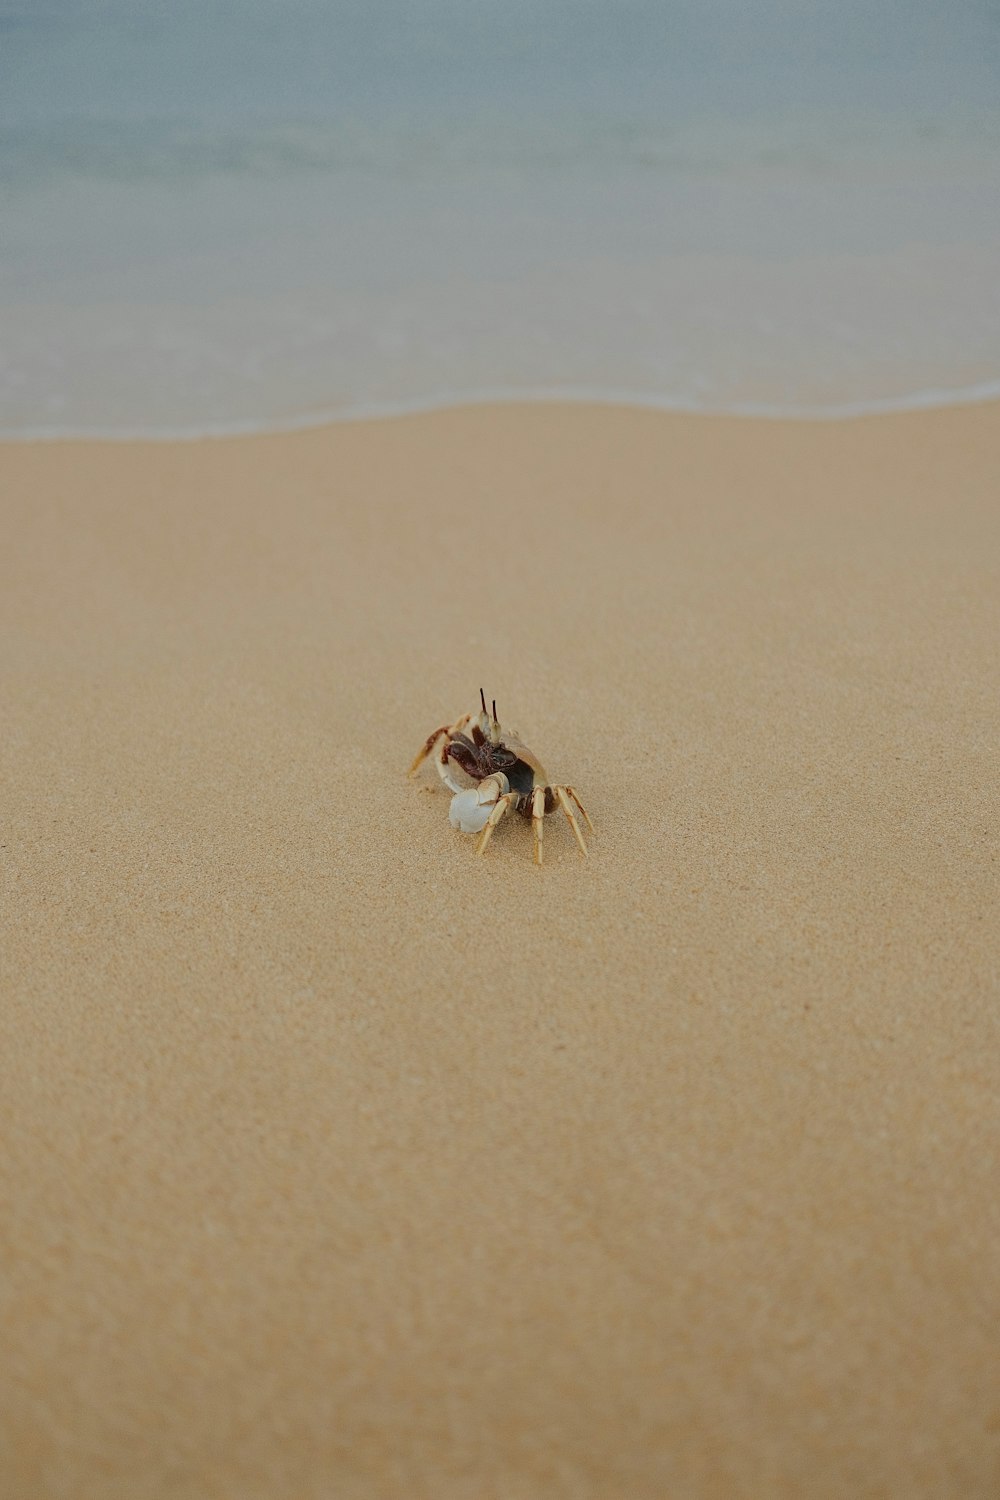 a crab crawling on a sandy beach next to the ocean